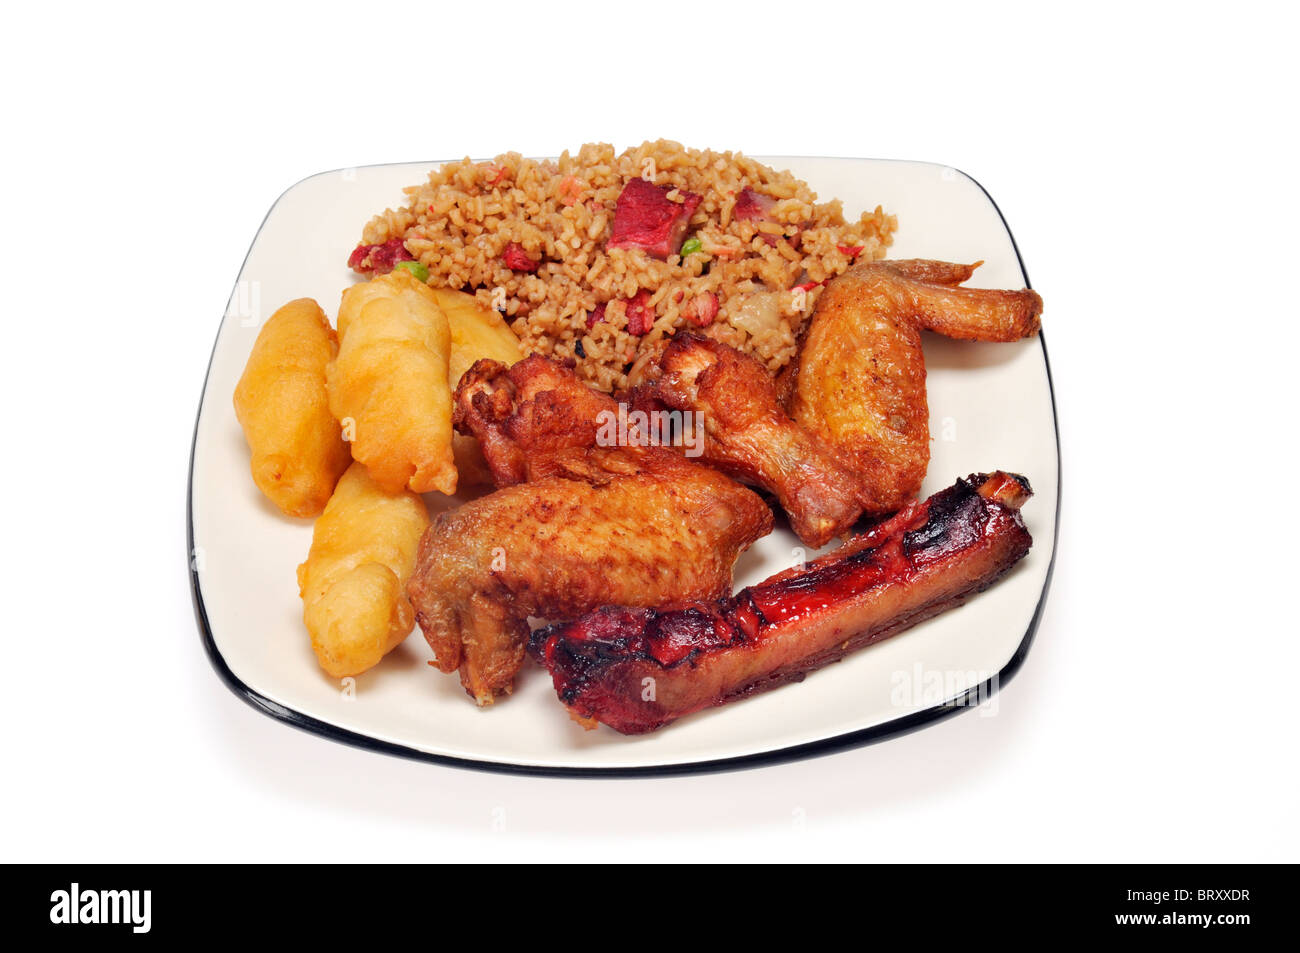 Plate of chinese food meal with pork fried rice, crispy fried chicken fingers, chicken wings & spare rib on white background. Stock Photo